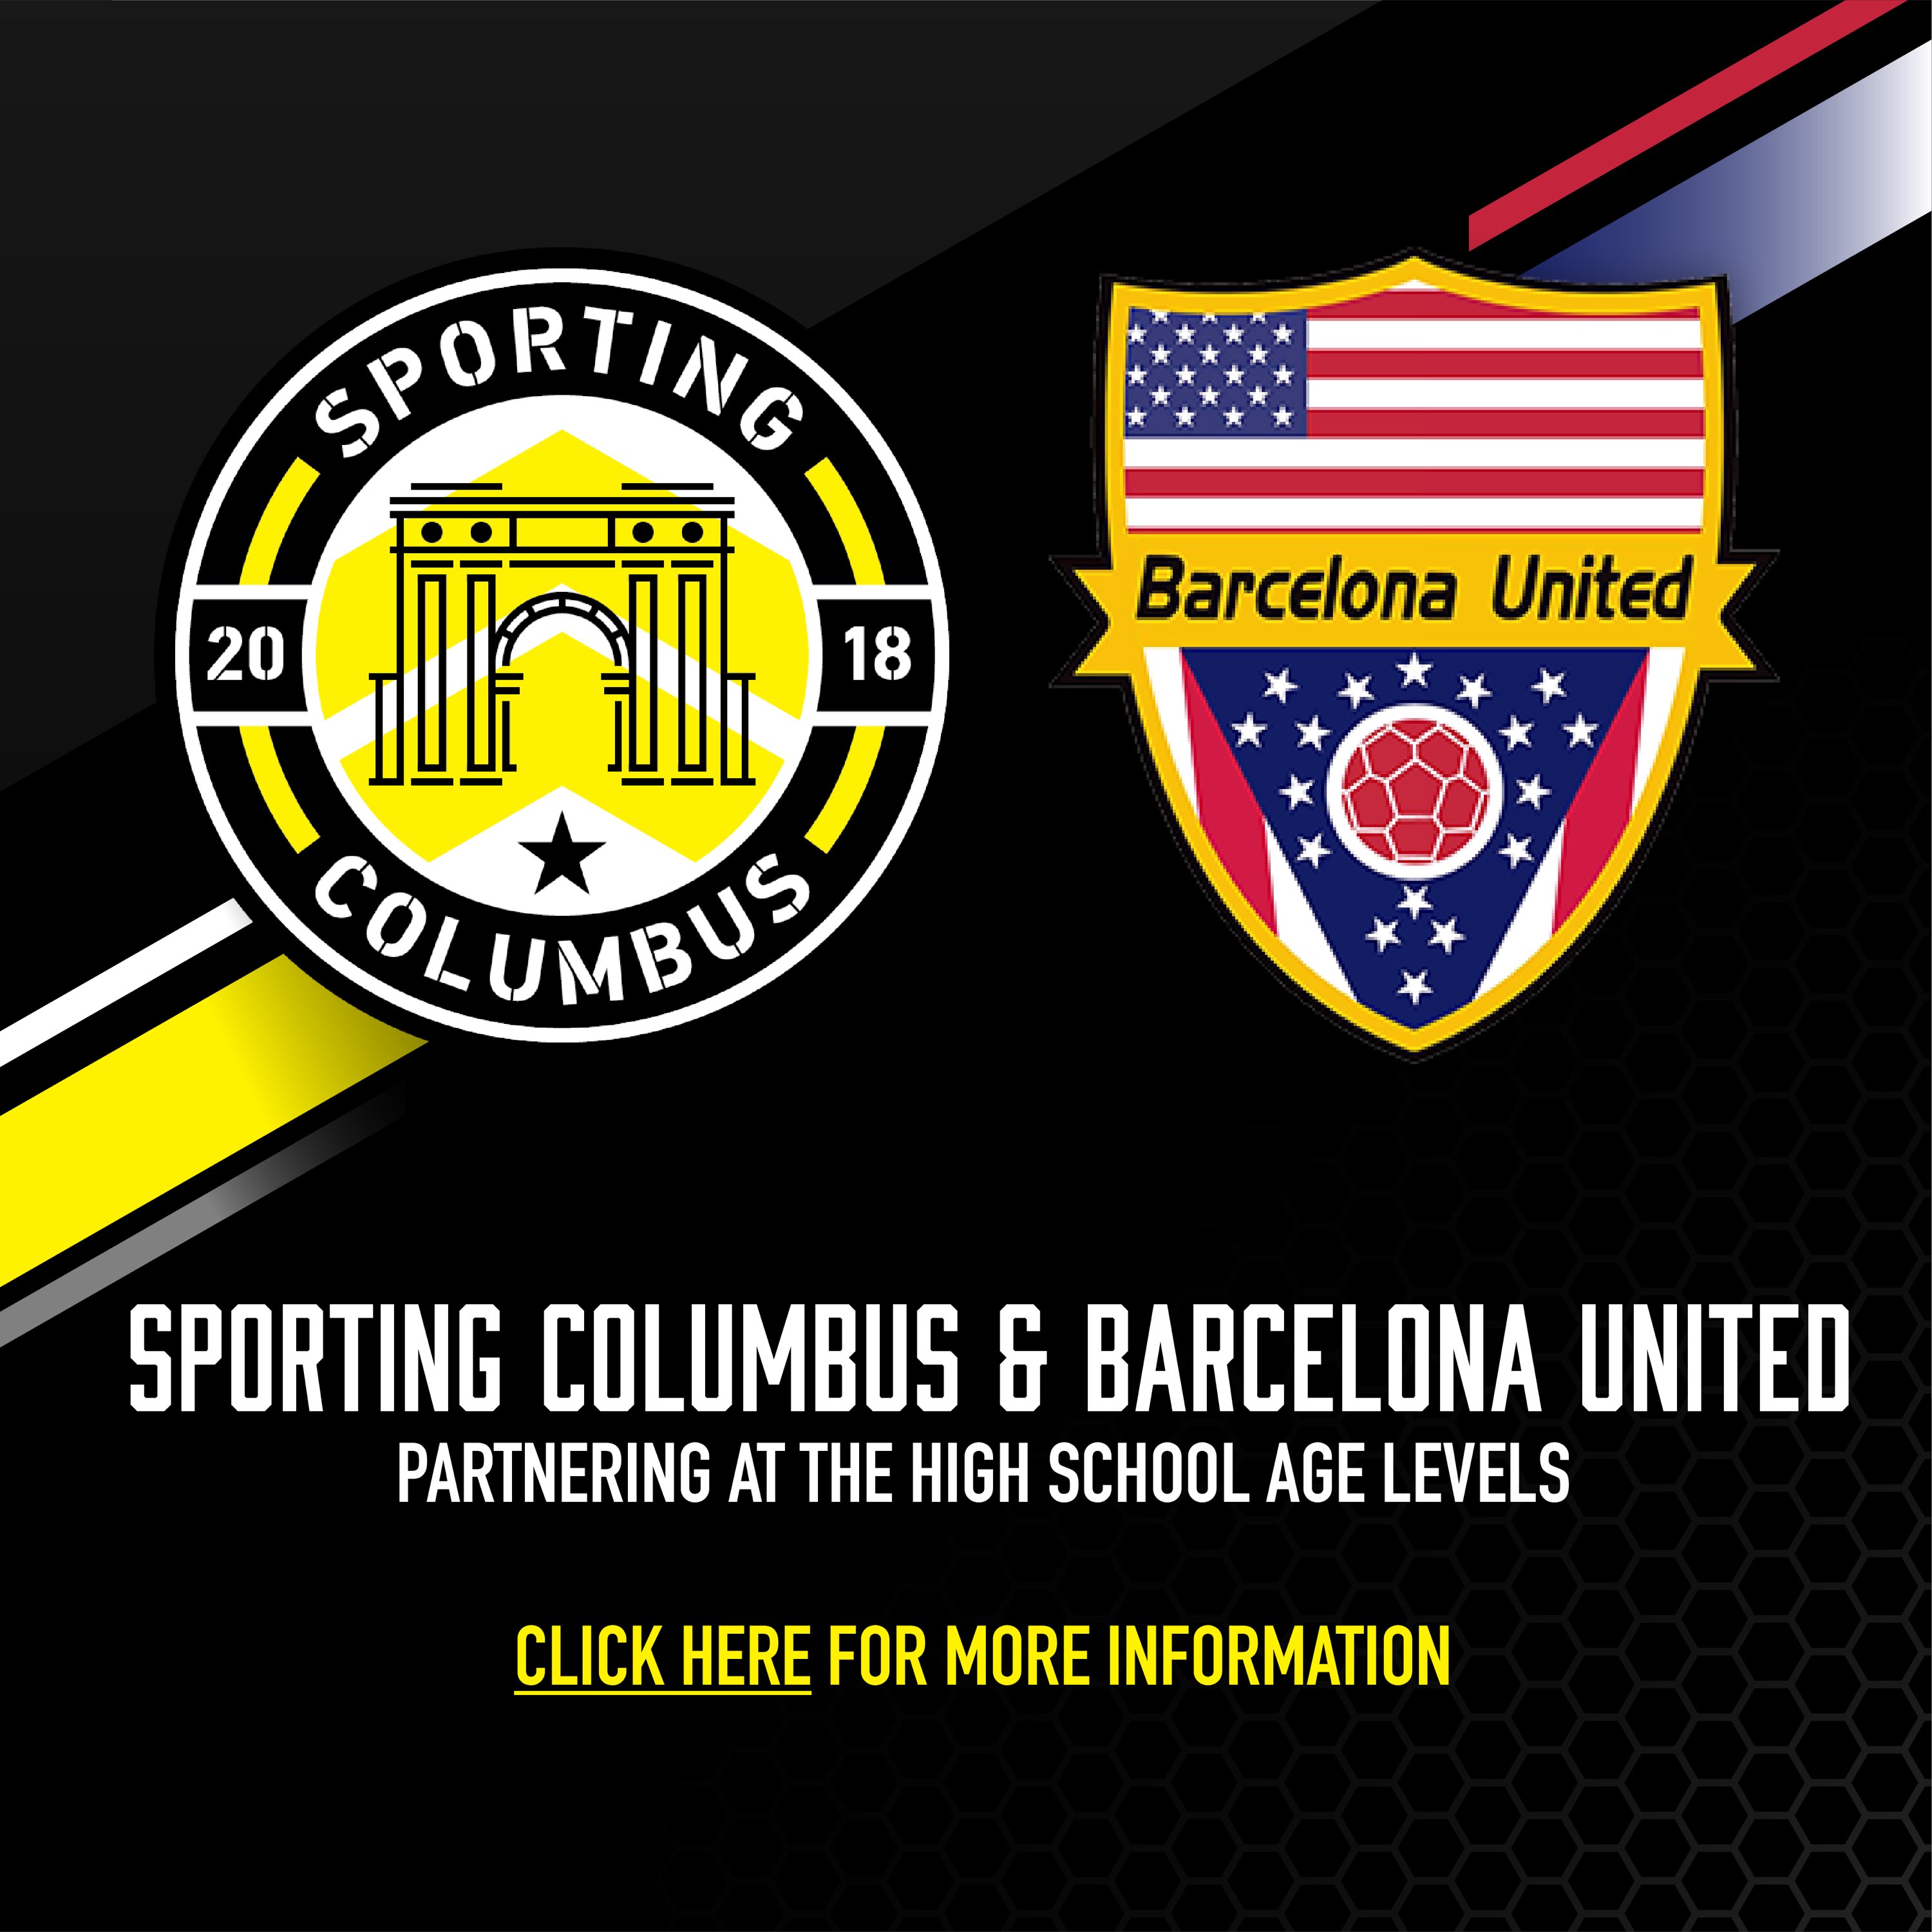 Barcelona United Partners with Sporting Columbus in the High School Age Groups